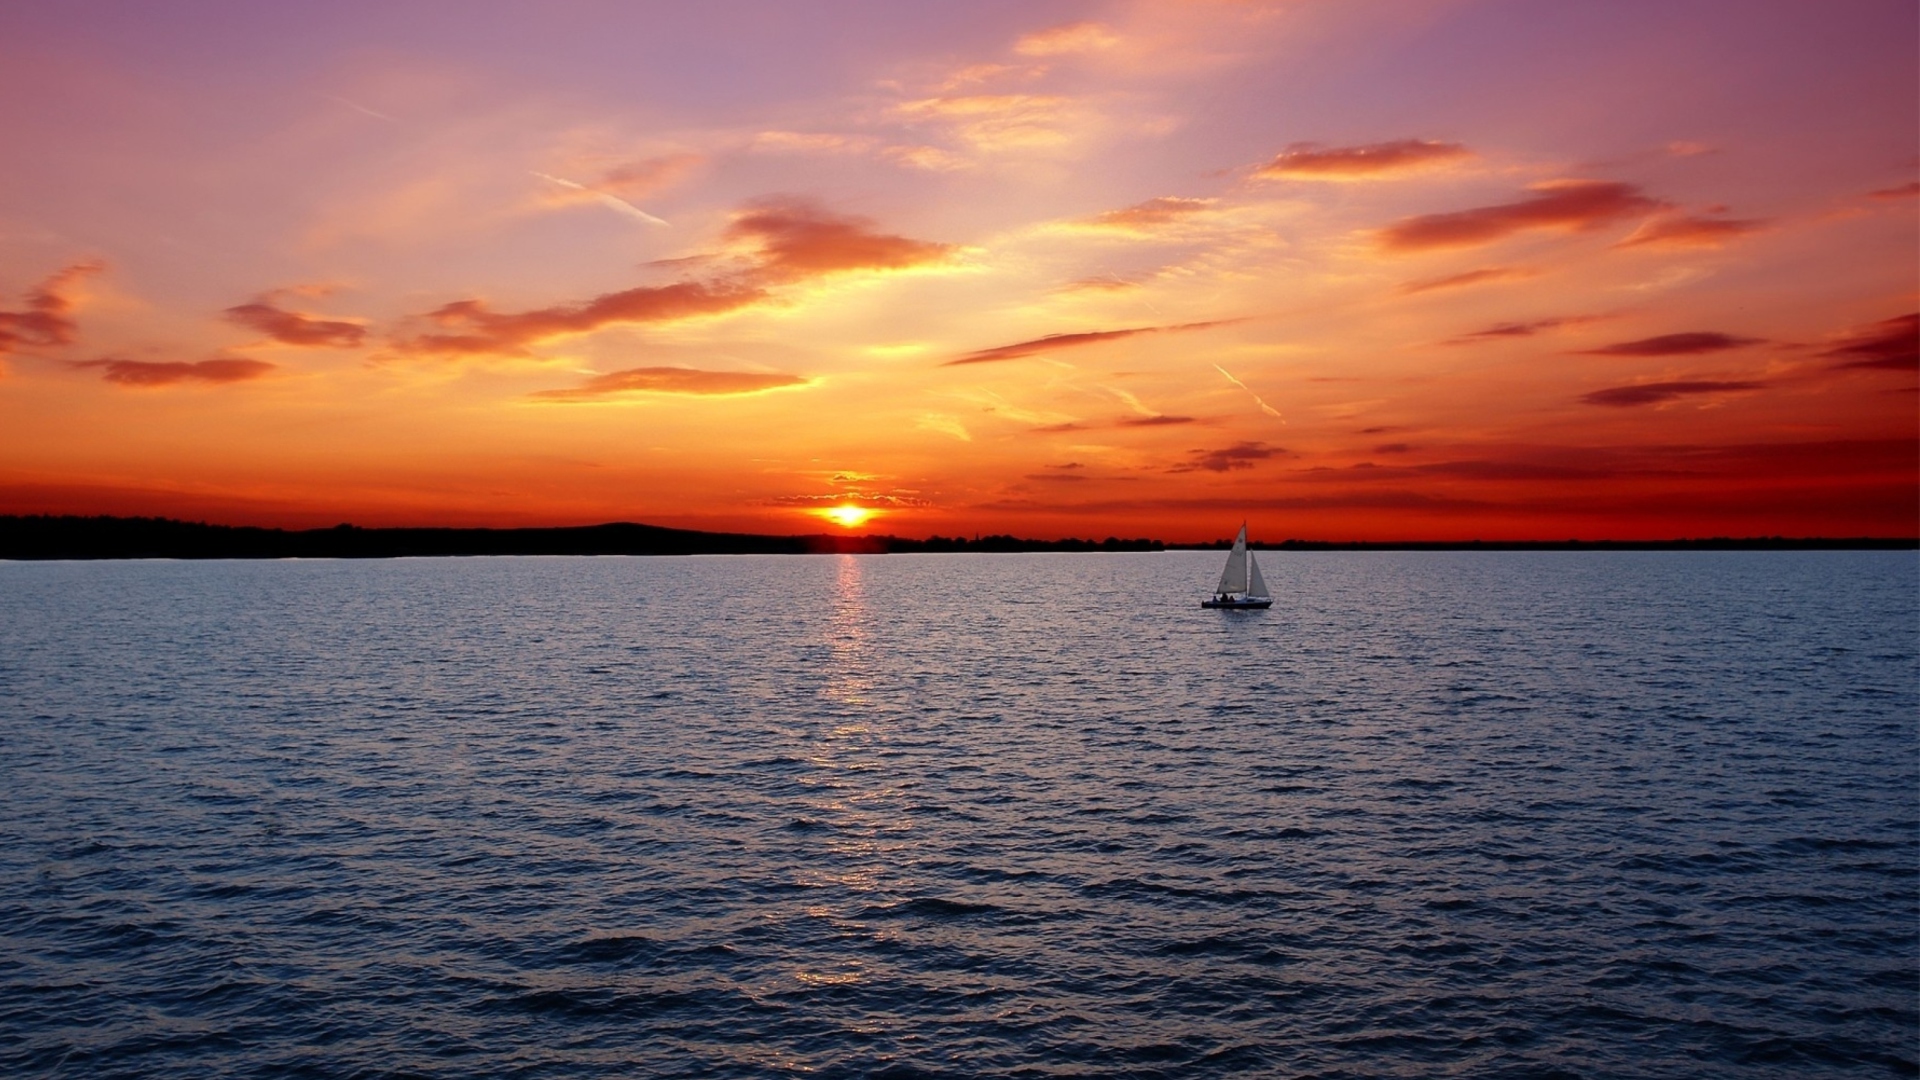 Ship In Sea At Sunset wallpaper 1920x1080